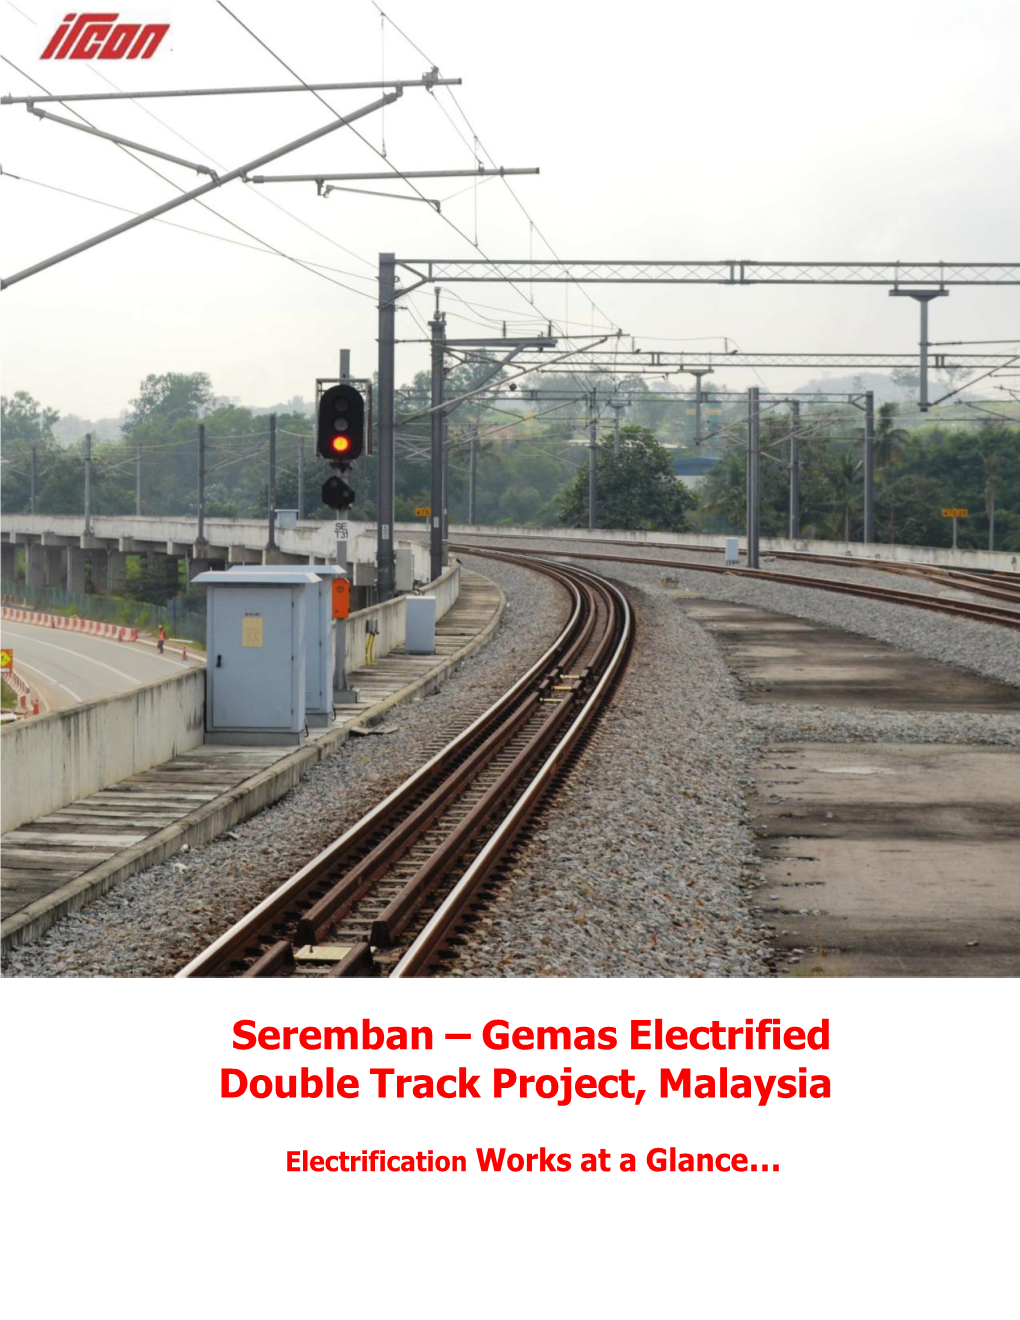 Seremban Gemas Electrified Double Track (SGEDT), Malaysia